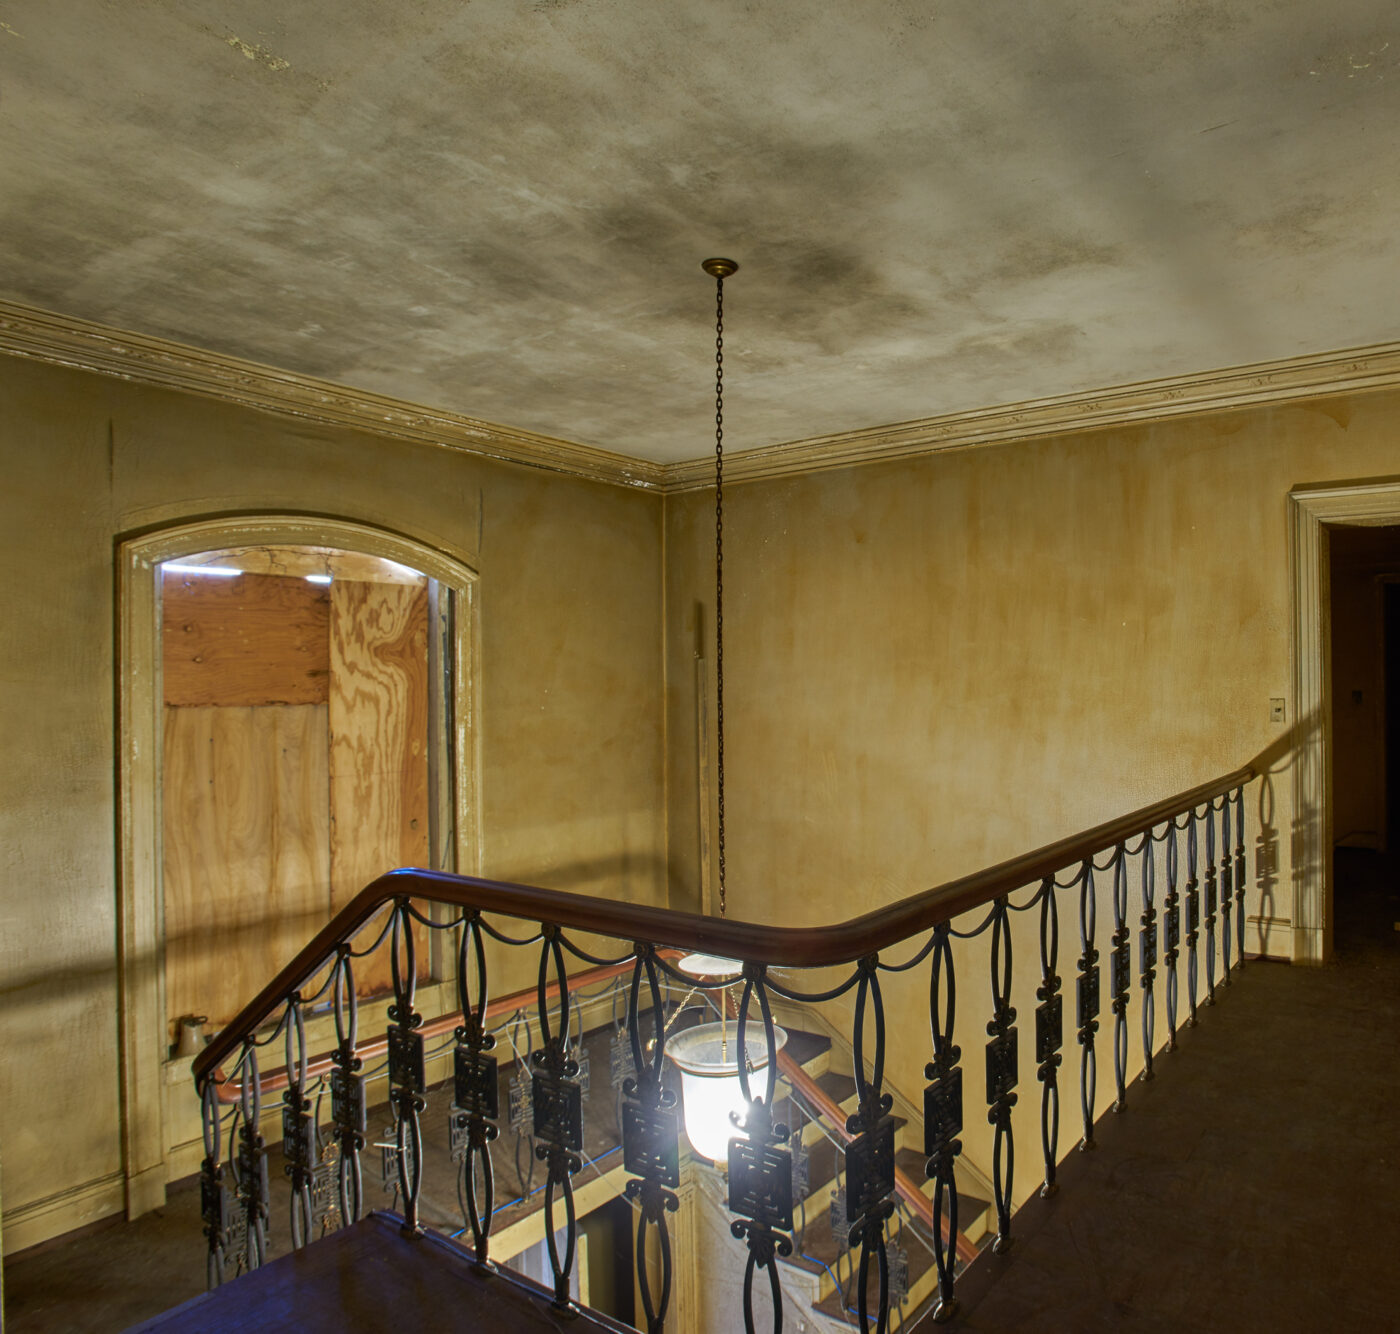 A photo of the second story landing, overlooking an ornate stair rail and a boarded-up second story window.